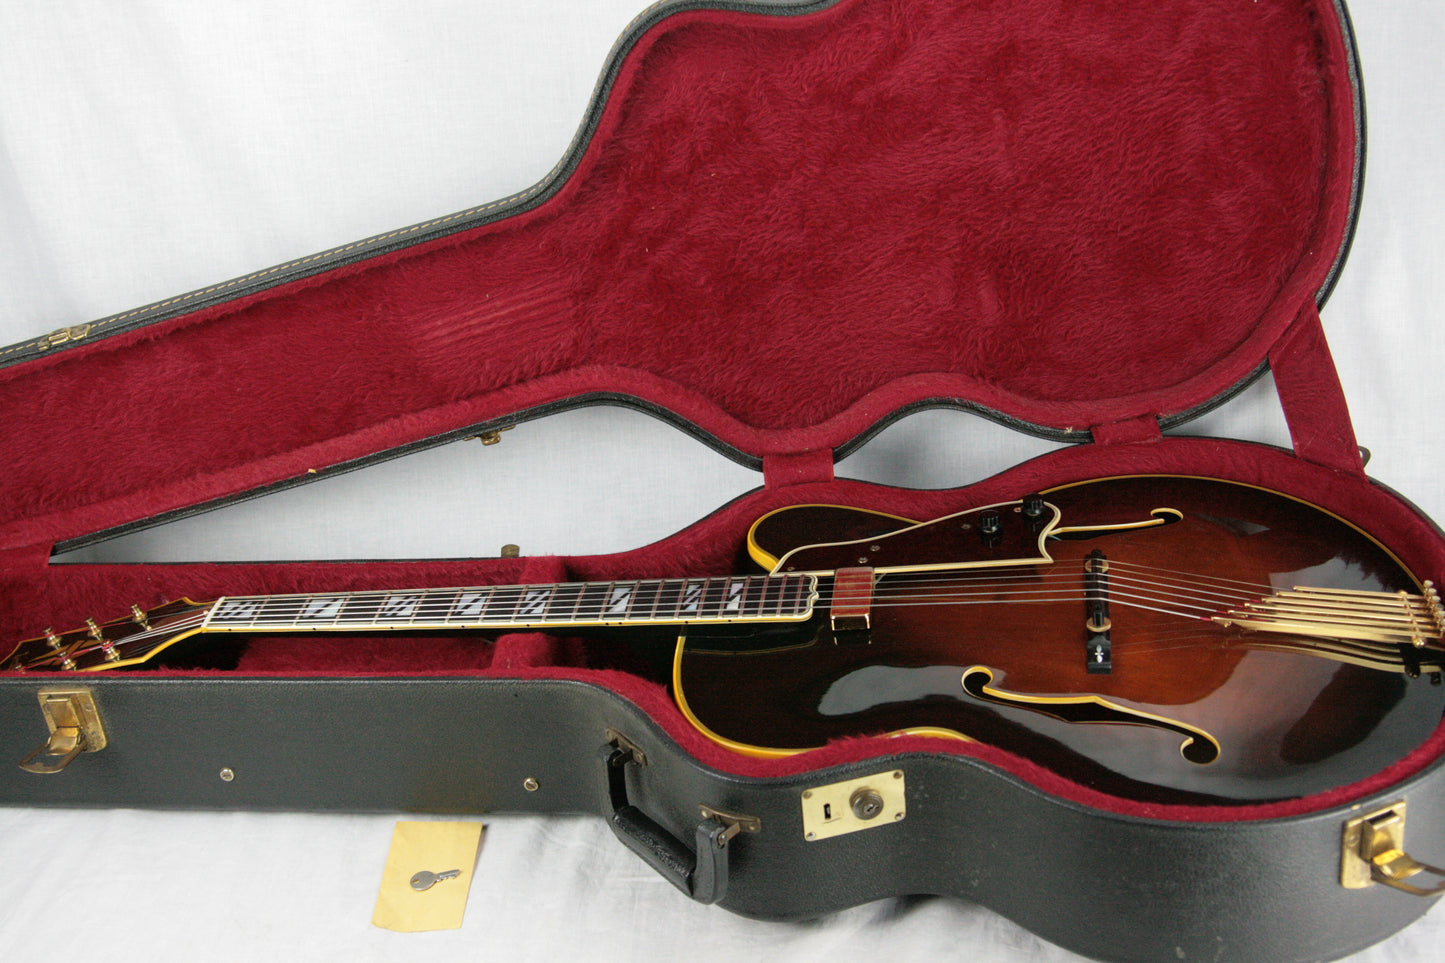 1979 Gibson Super V BJB Archtop Electric Guitar! L-5 400 Johnny Smith Floating Pickup